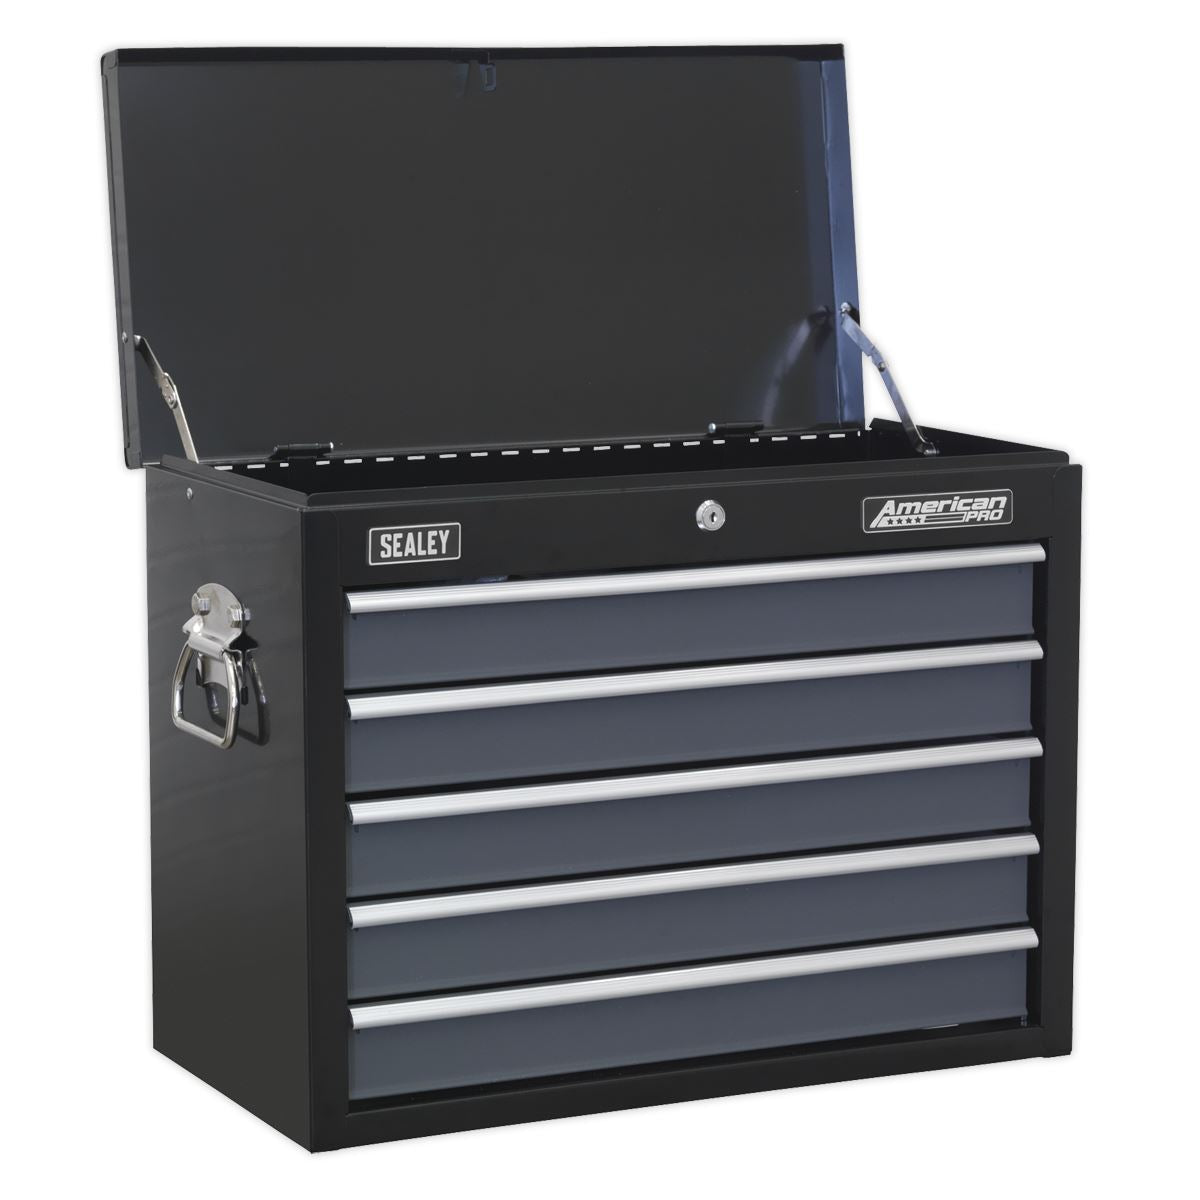 Sealey American Pro Topchest 5 Drawer with Ball-Bearing Slides - Black/Grey